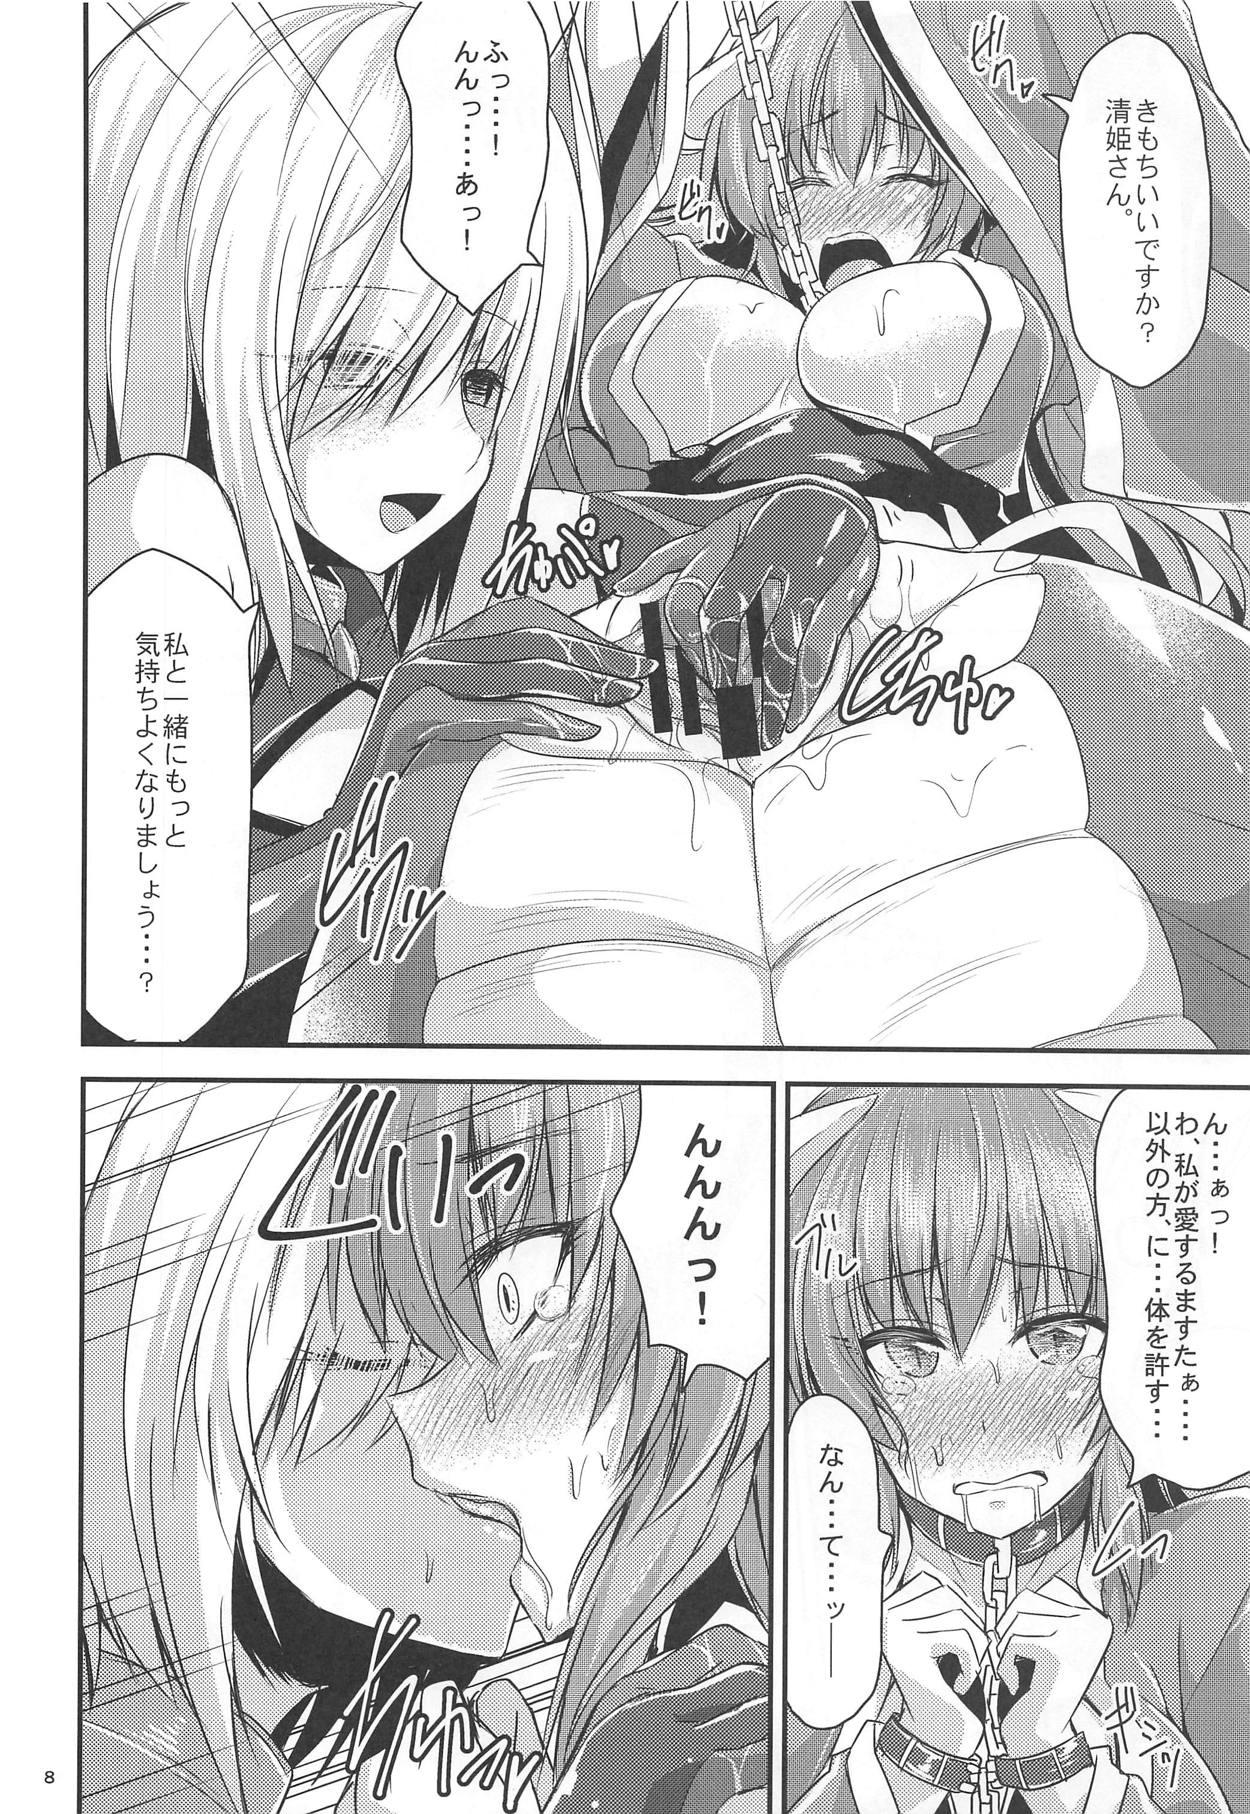 Celebrity Porn Jingai Ero β - Touhou project The idolmaster Fate grand order Amature Sex - Page 7